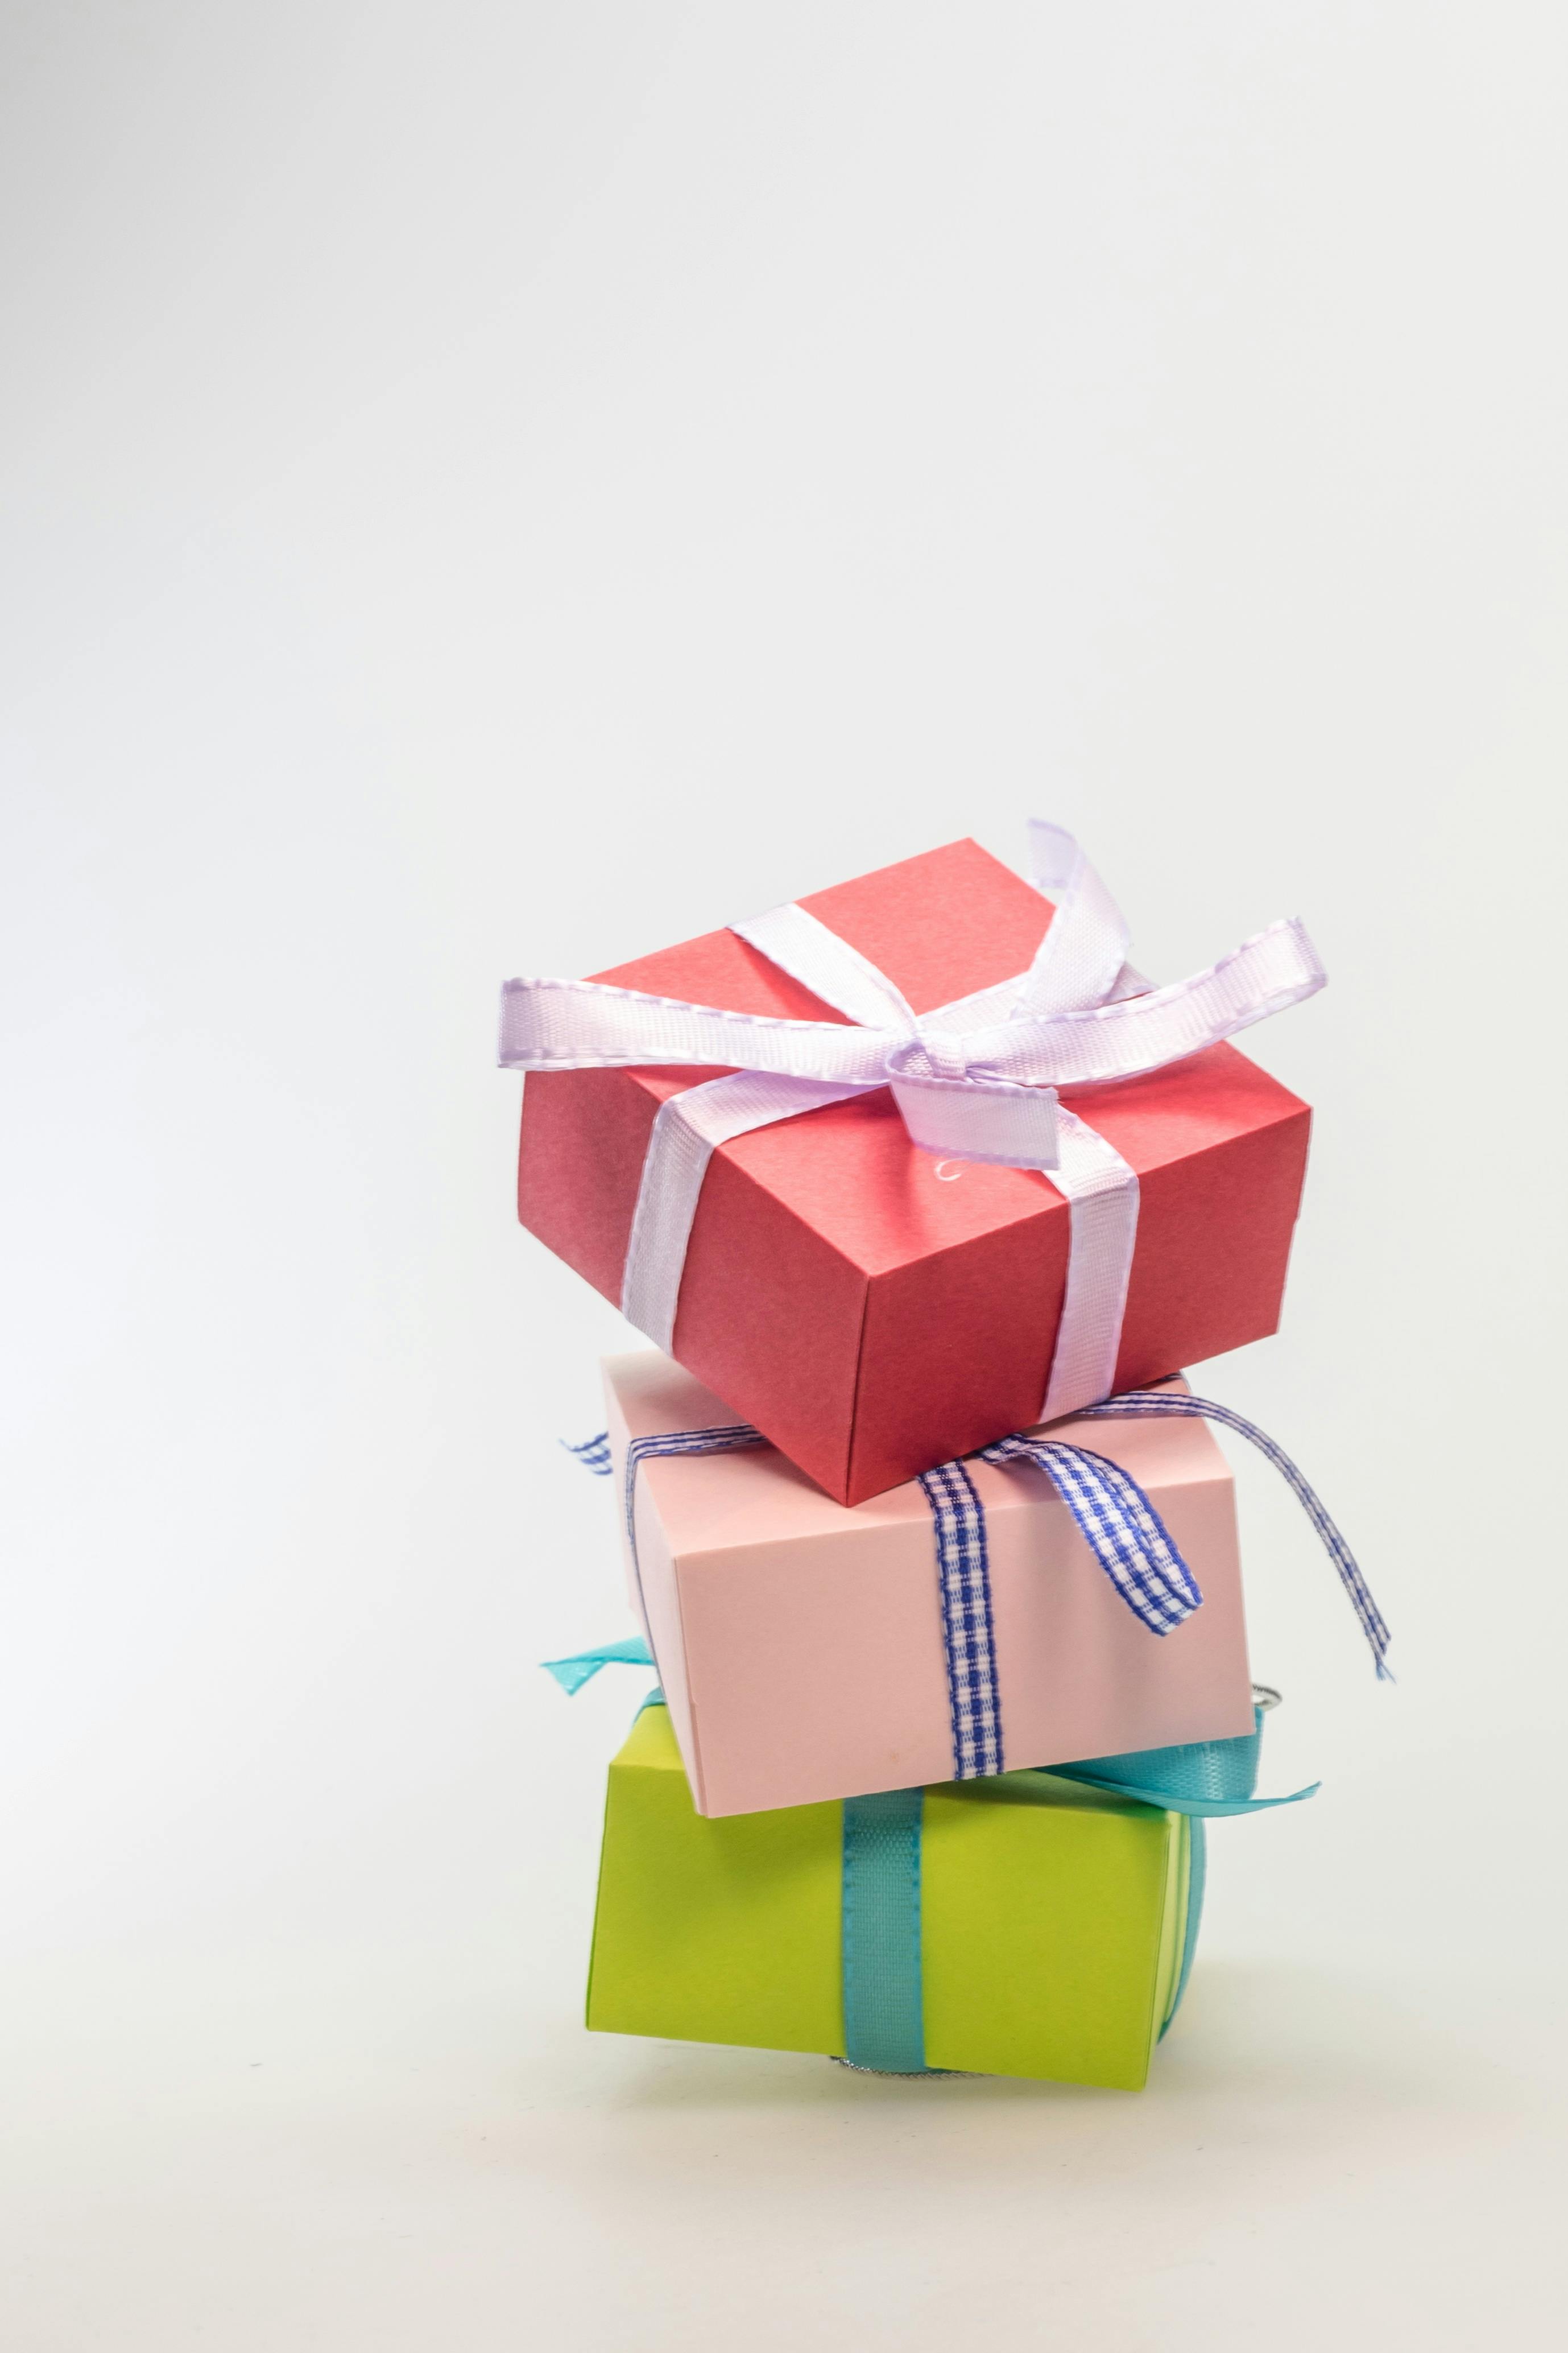 Gift Box Photos, Download The BEST Free Gift Box Stock Photos & HD Images